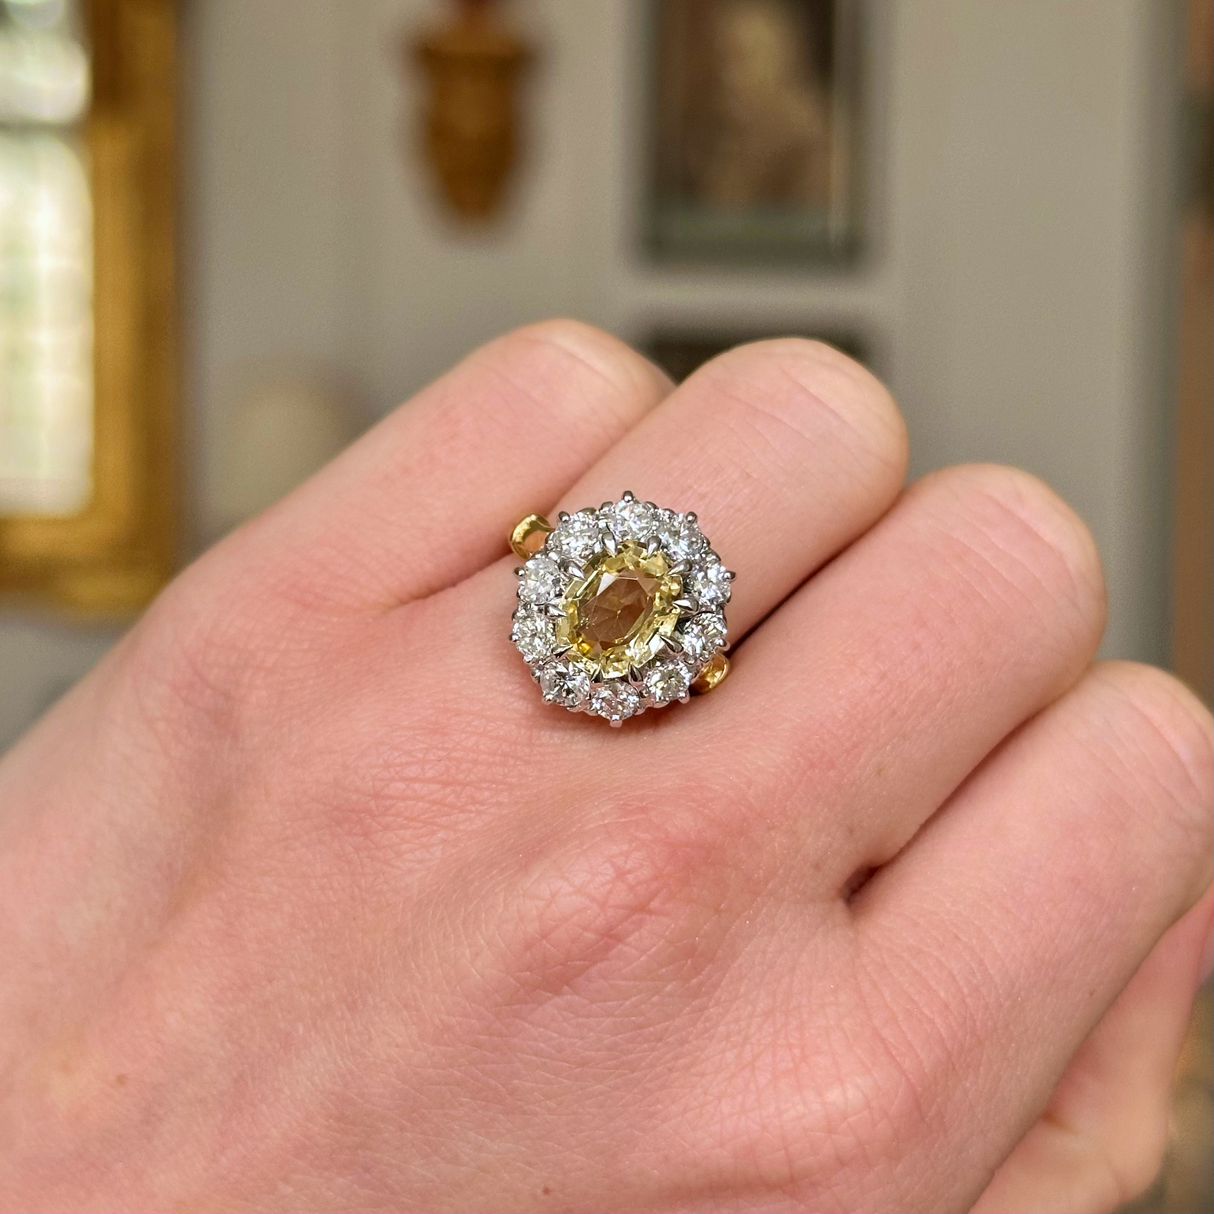 Antique, Victorian Yellow Sapphire and Diamond Ring, worn on closed hand.